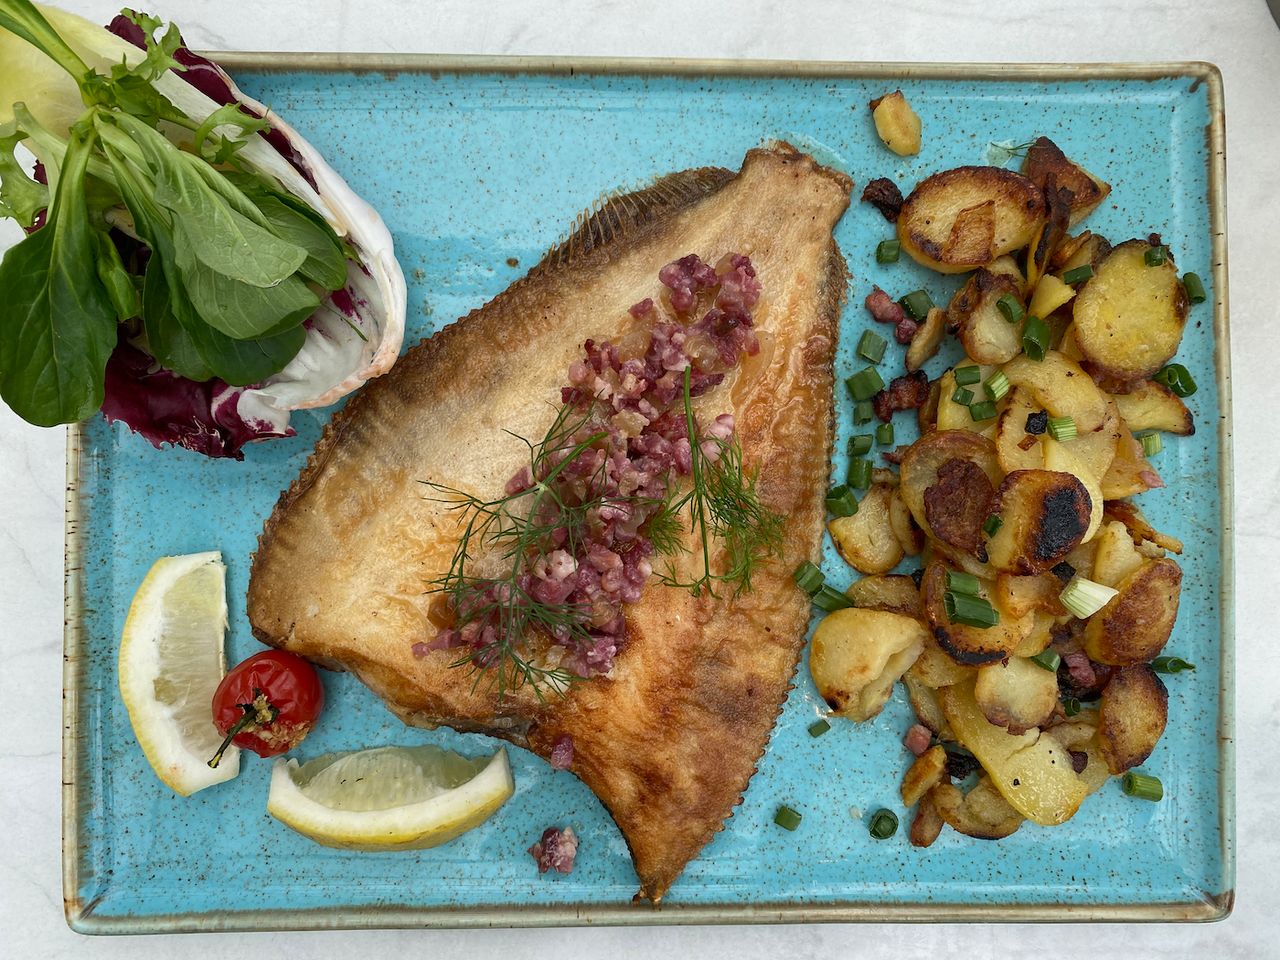 A turquoise plate with a whole fried fish, fried potatoes and some green leafy garnishing.